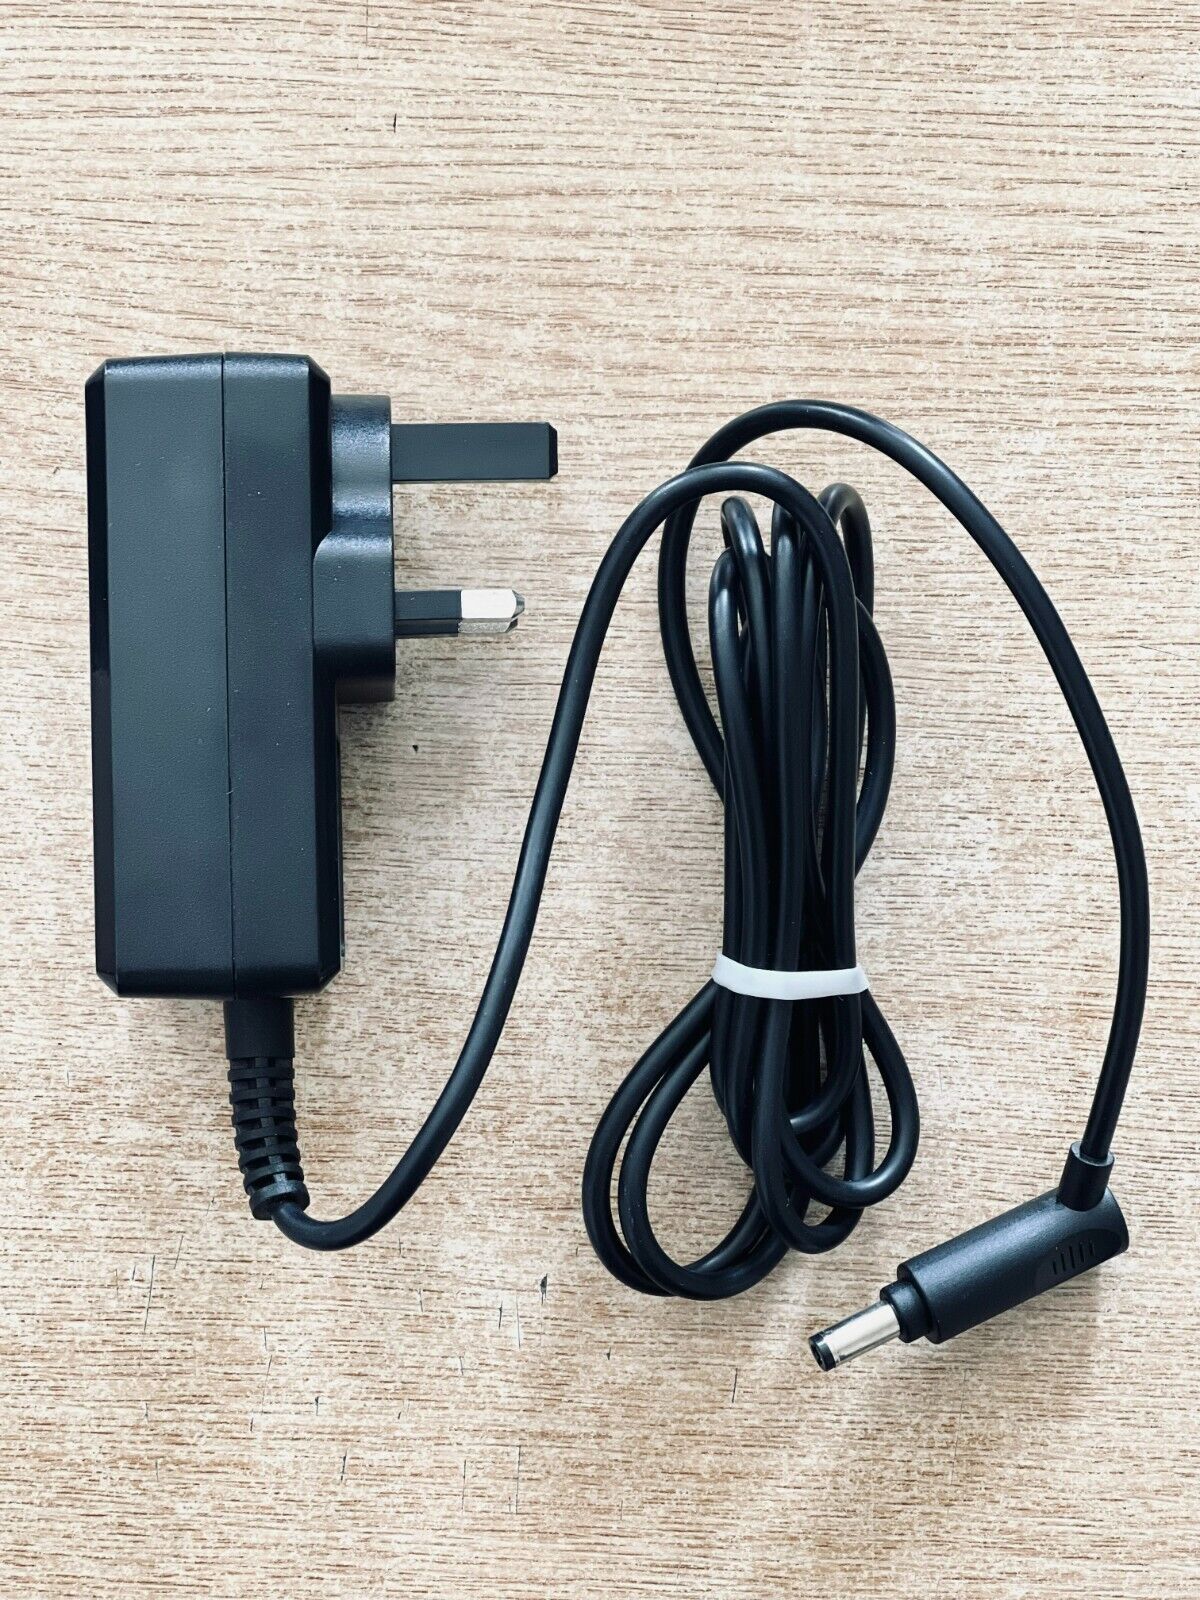 5V 2A AC Adaptor Power Supply Charger for CELLO T1144 10.1" Tablet PC 100% Brand New Cord/Line Length: about 1 Meter